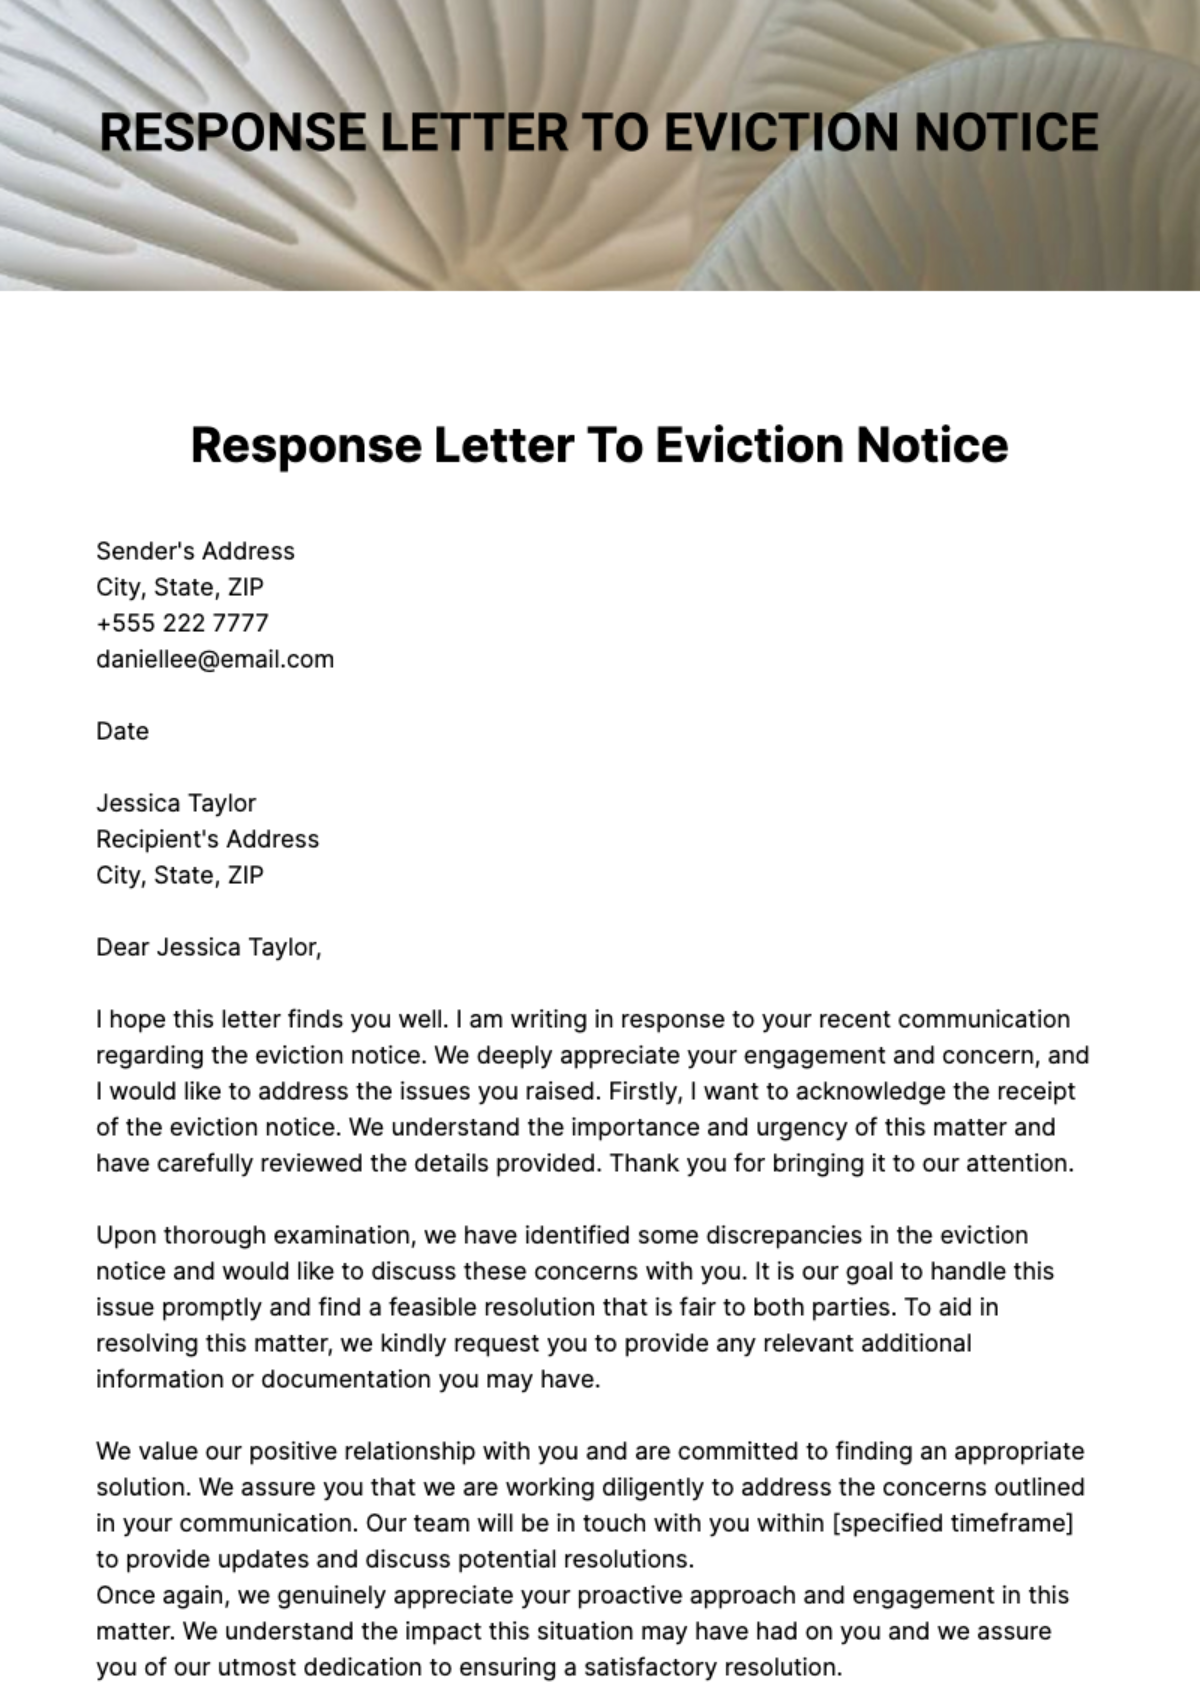 Response Letter To Eviction Notice Template